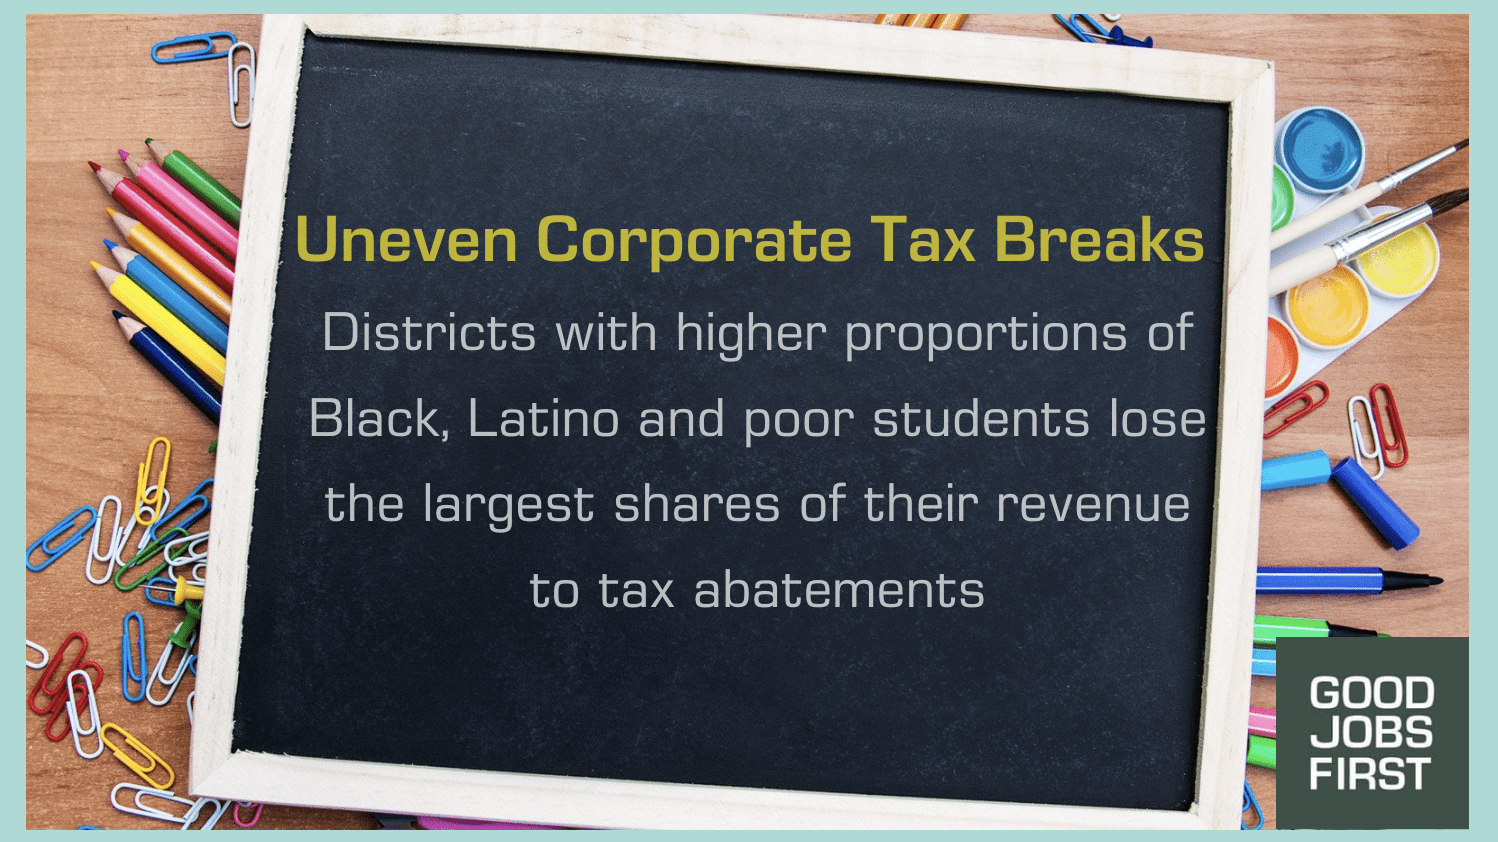 School supplies surround a chalkboard with the text: Uneven Corporate Tax Breaks  Districts with higher proportions of Black, Latino and poor students lose the largest shares of their revenue to tax abatements